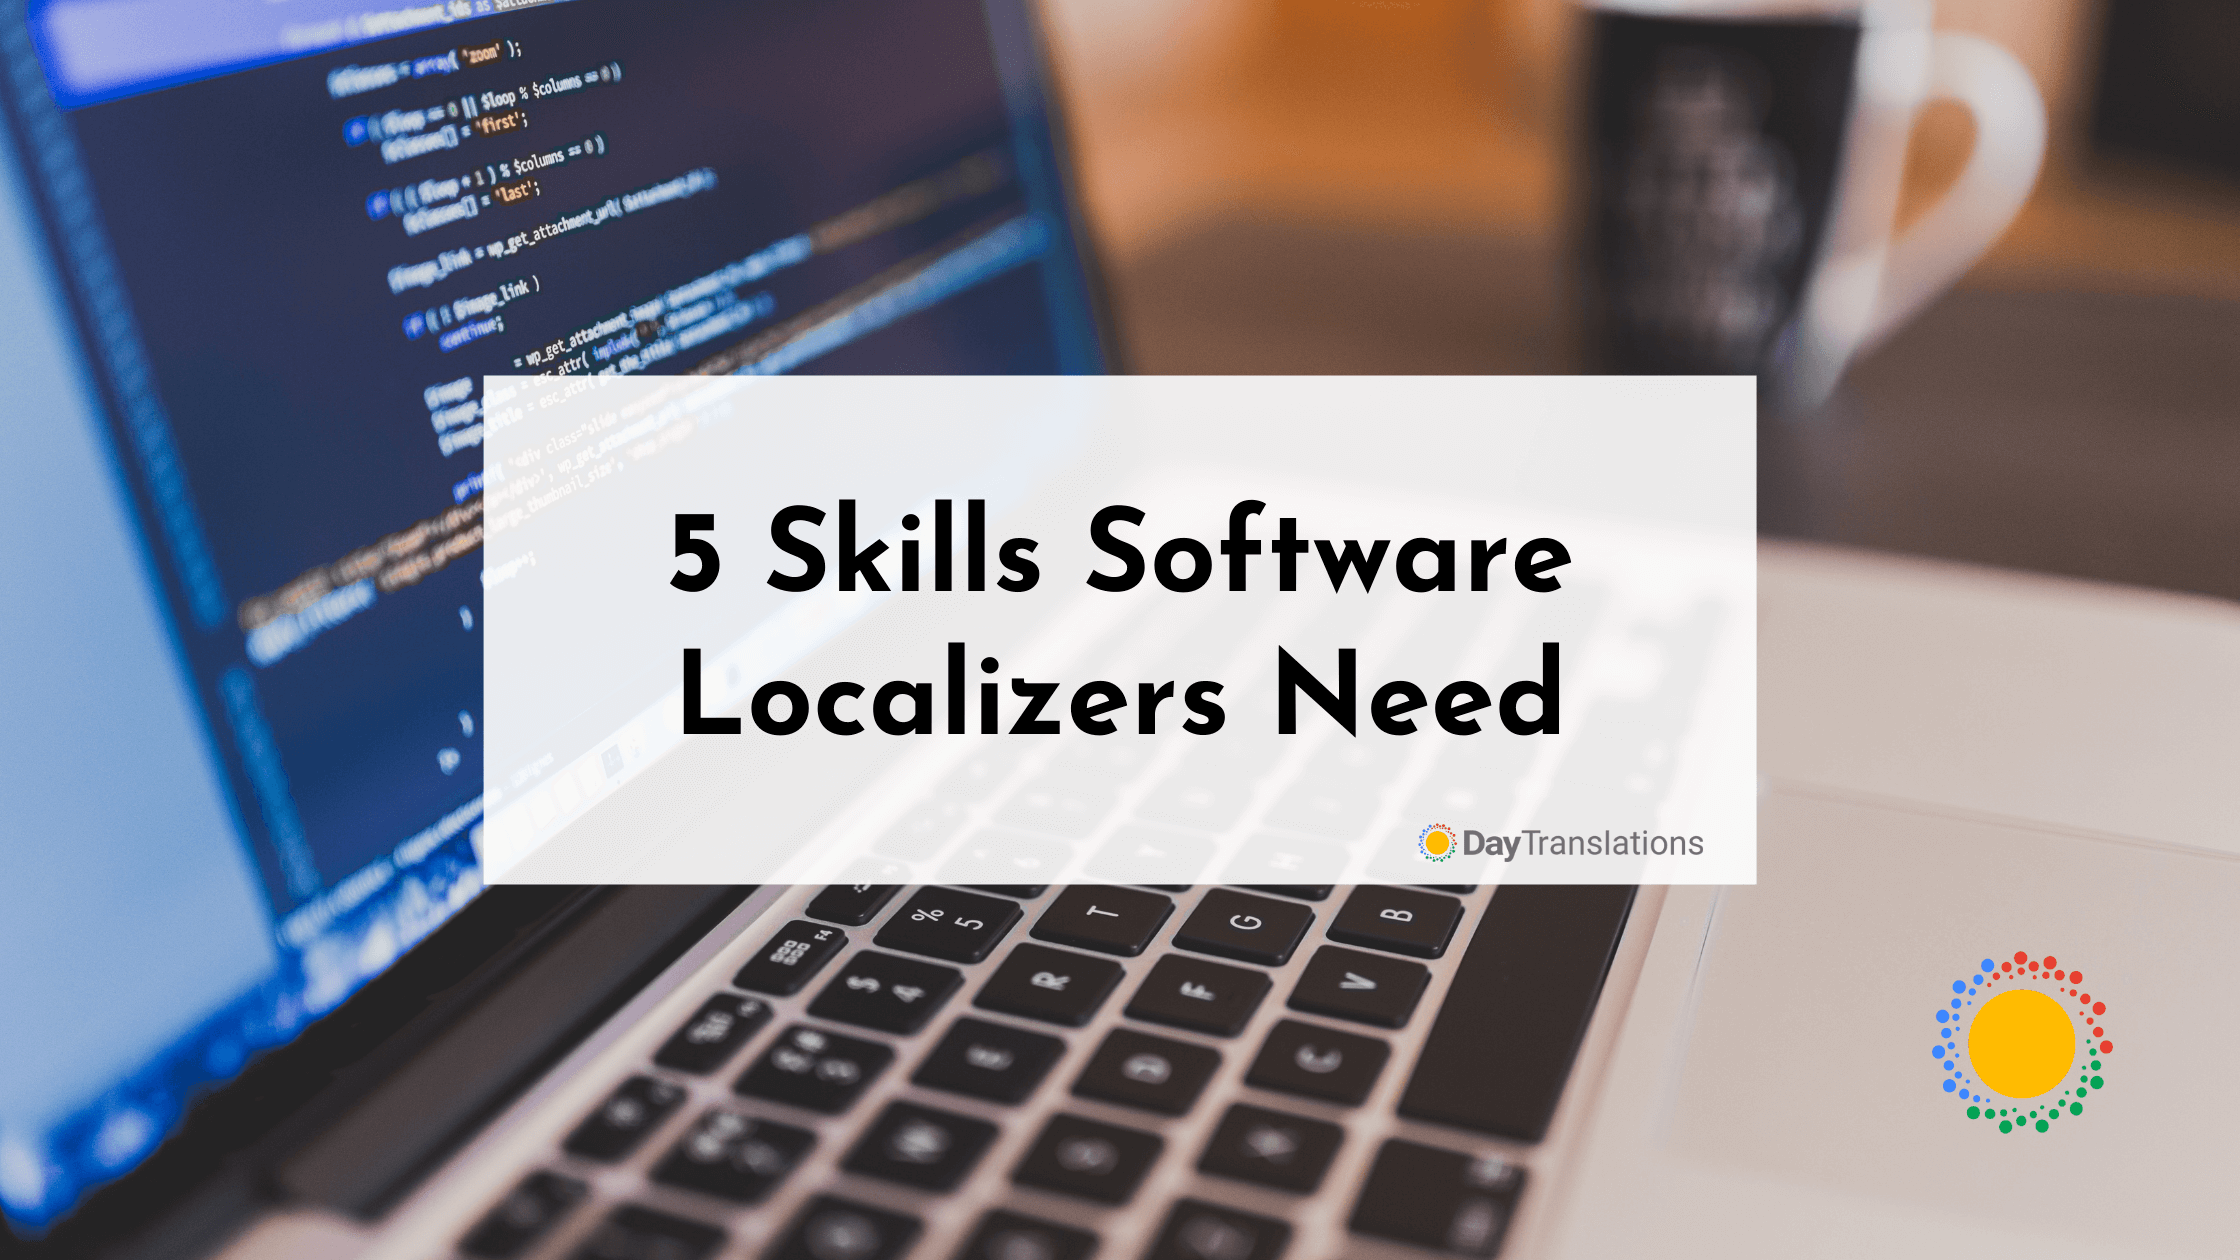 5 Skills Software Localizers Need